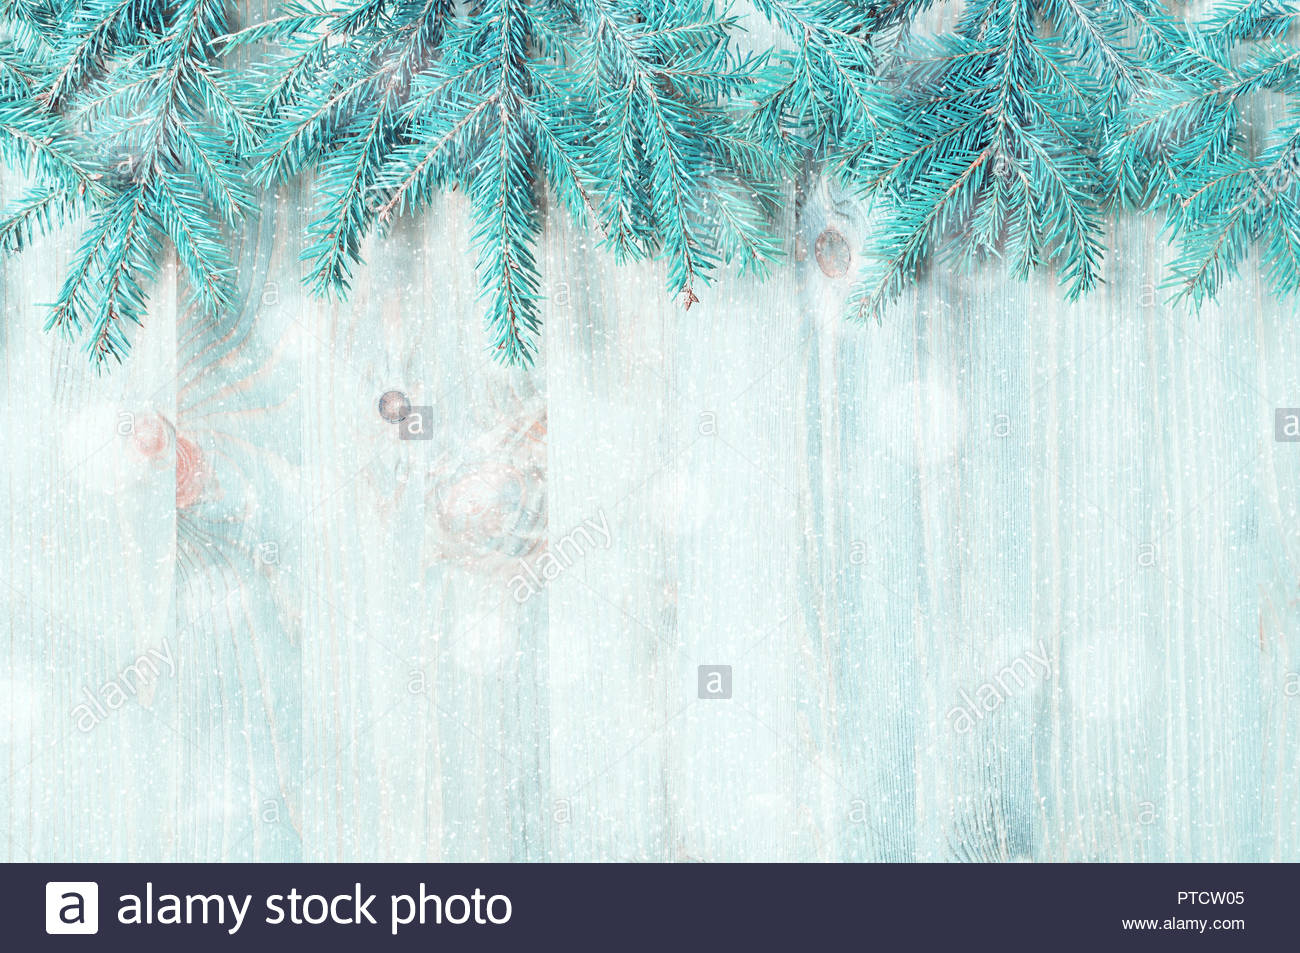 Winter Background Blue Fir Tree Branches With Snowflakes